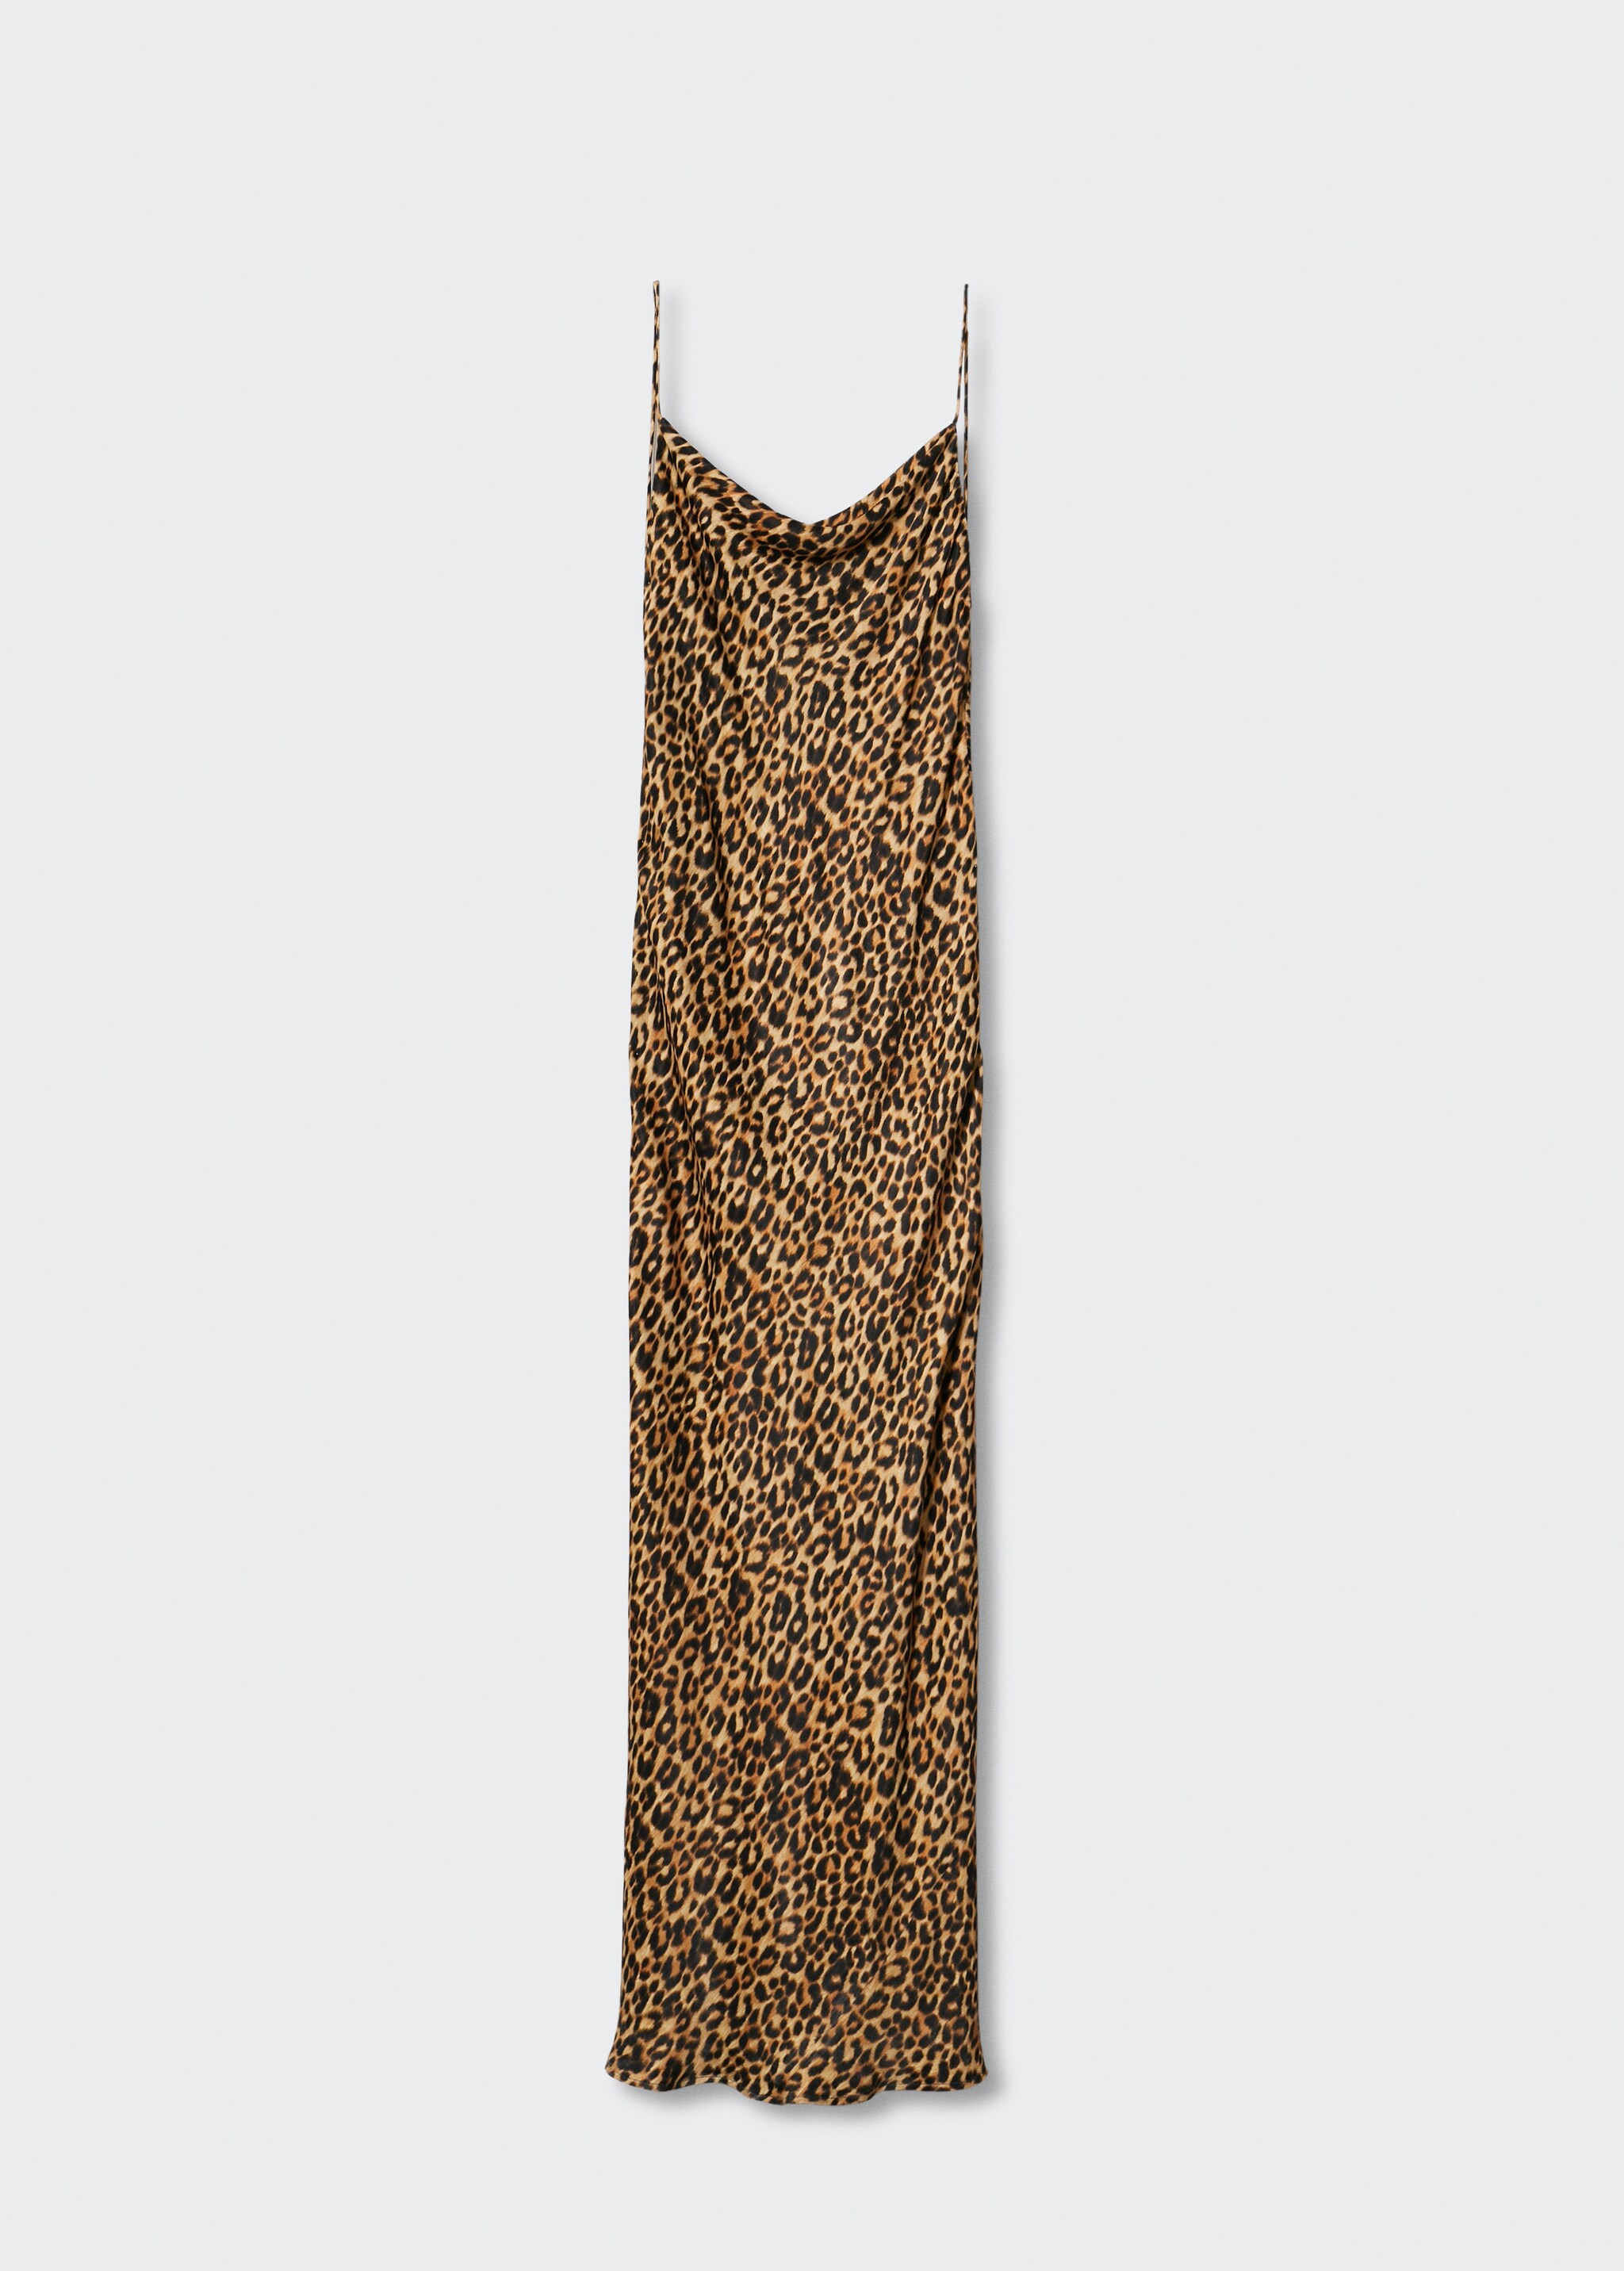 Animal-print fluid dress - Article without model